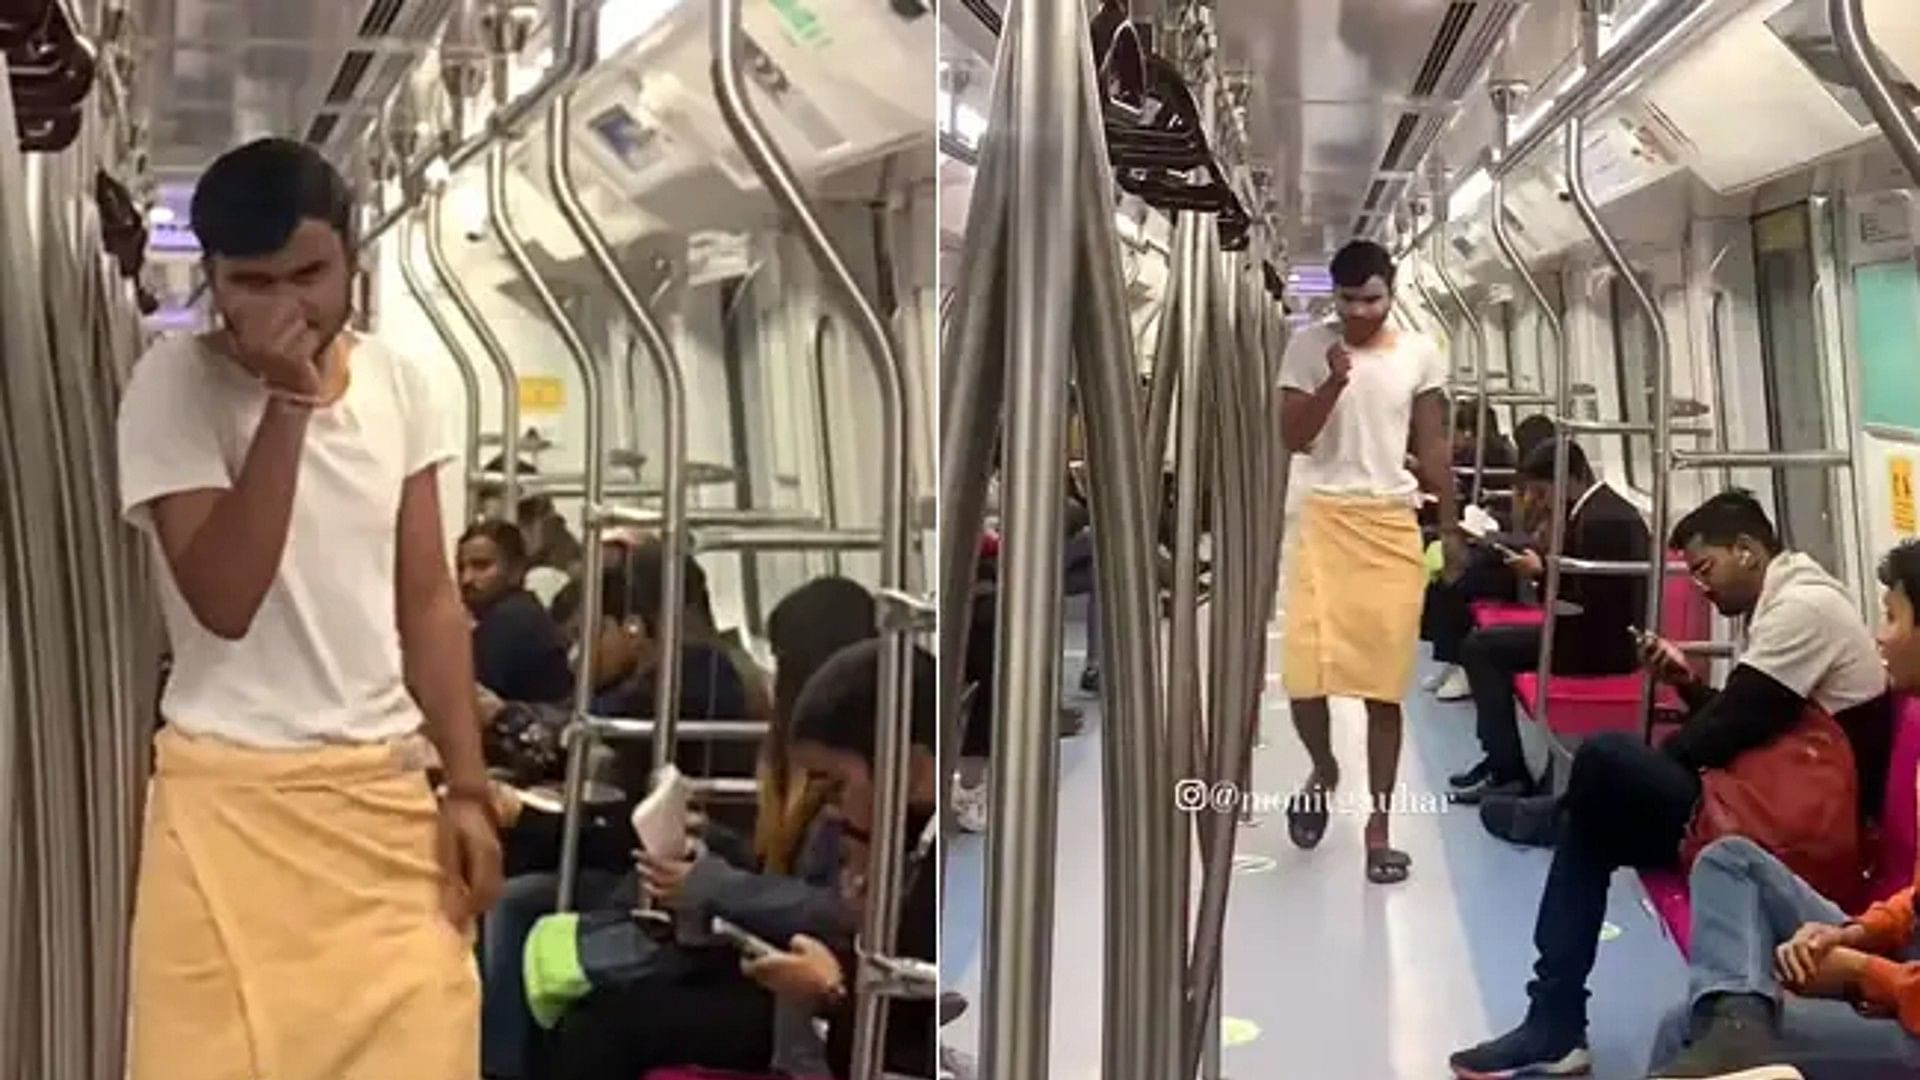 Man arrived in the metro wearing towel video went viral on social media